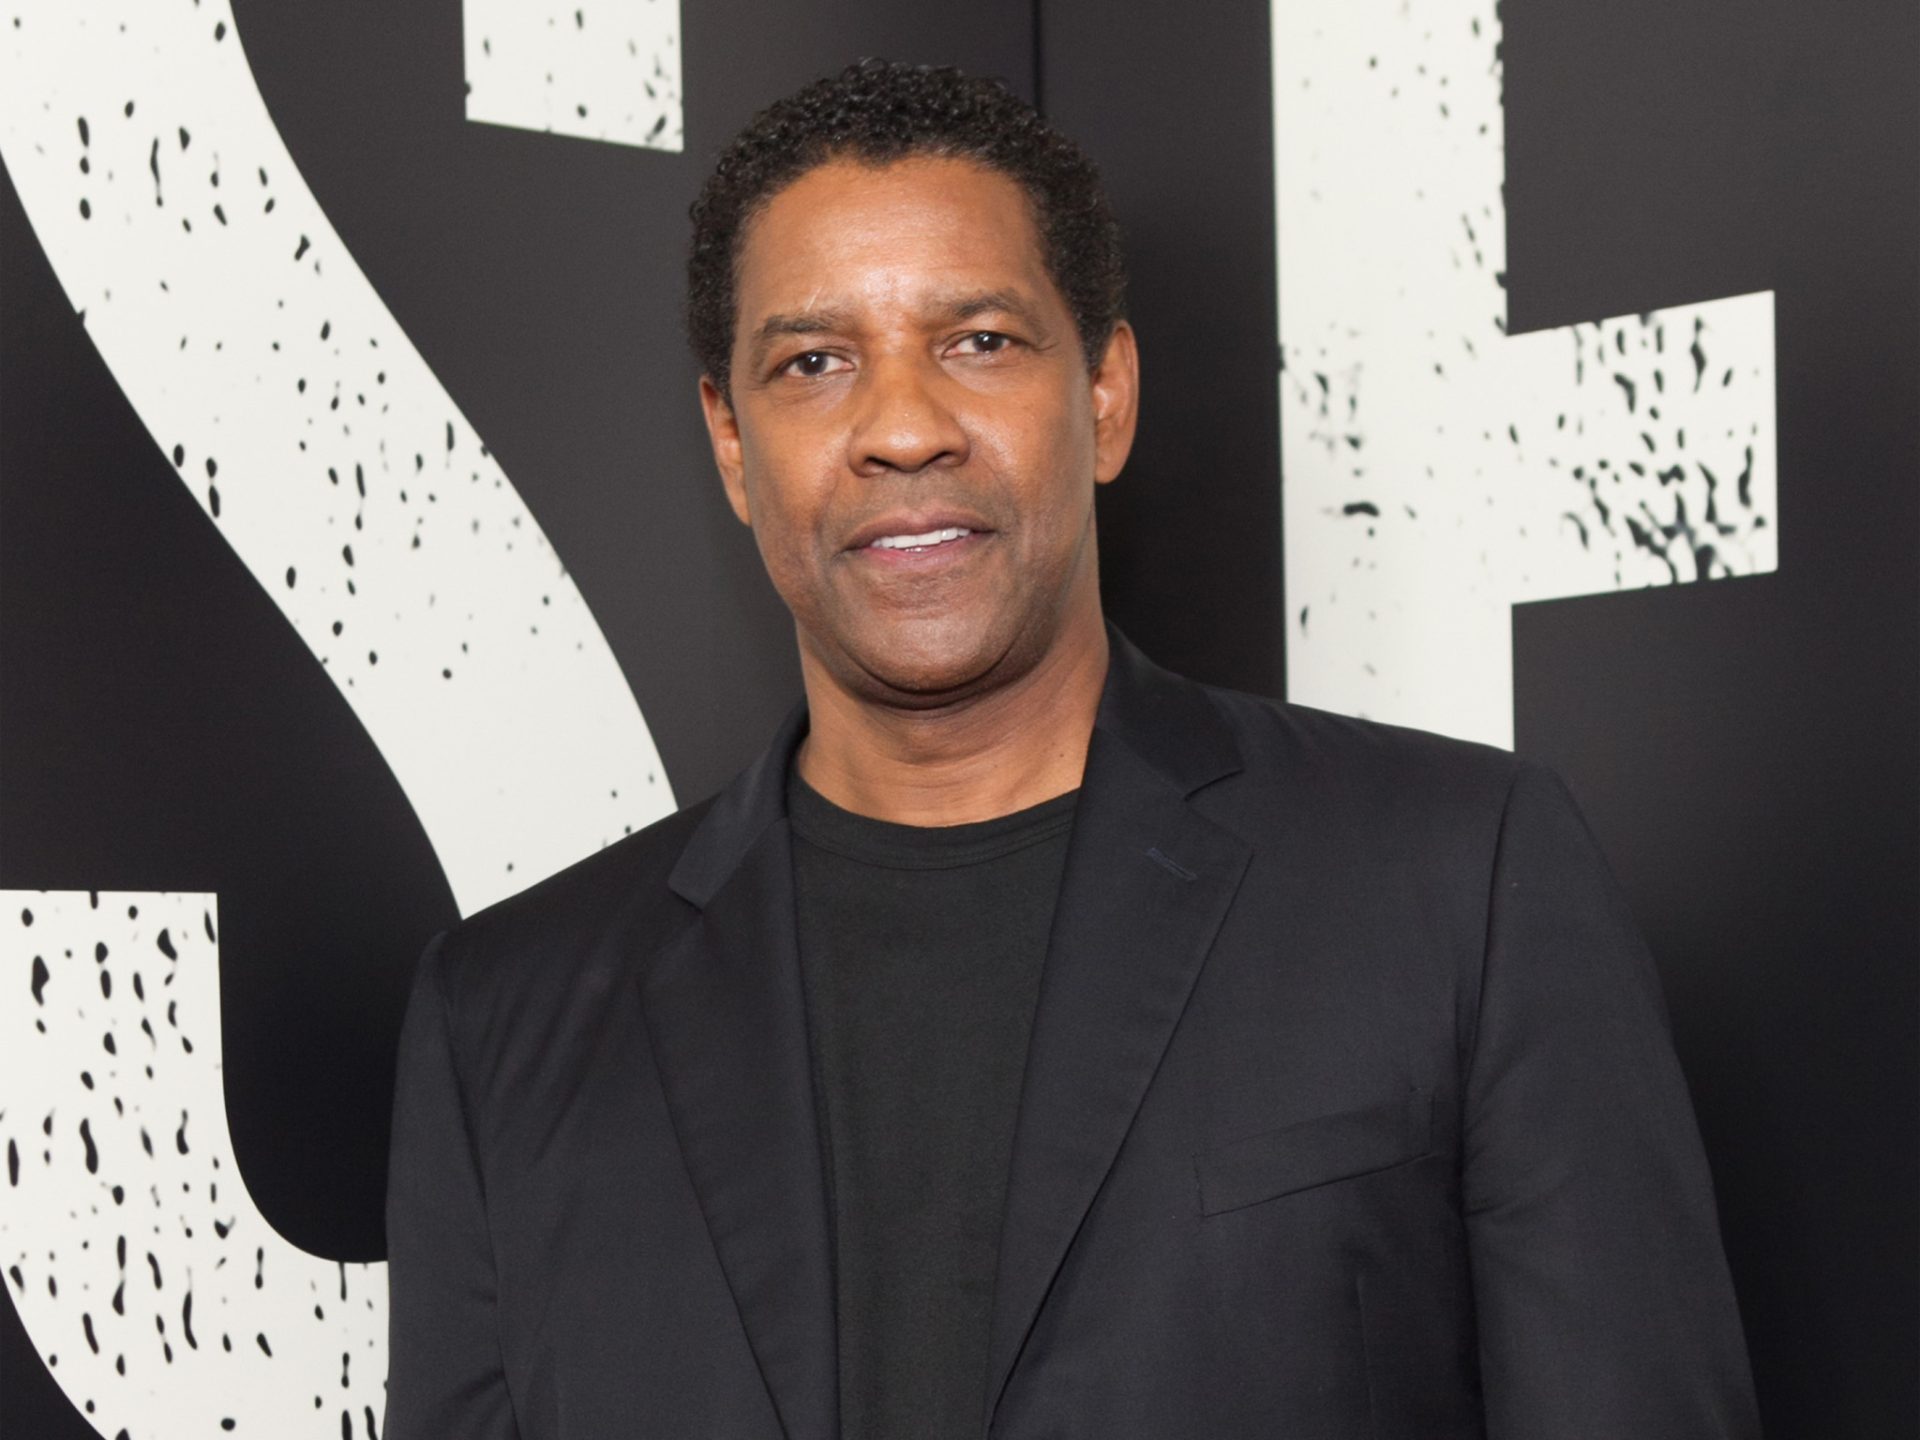 Jay-Z tries to calm Denzel Washington during heated dispute at NBA game (video)